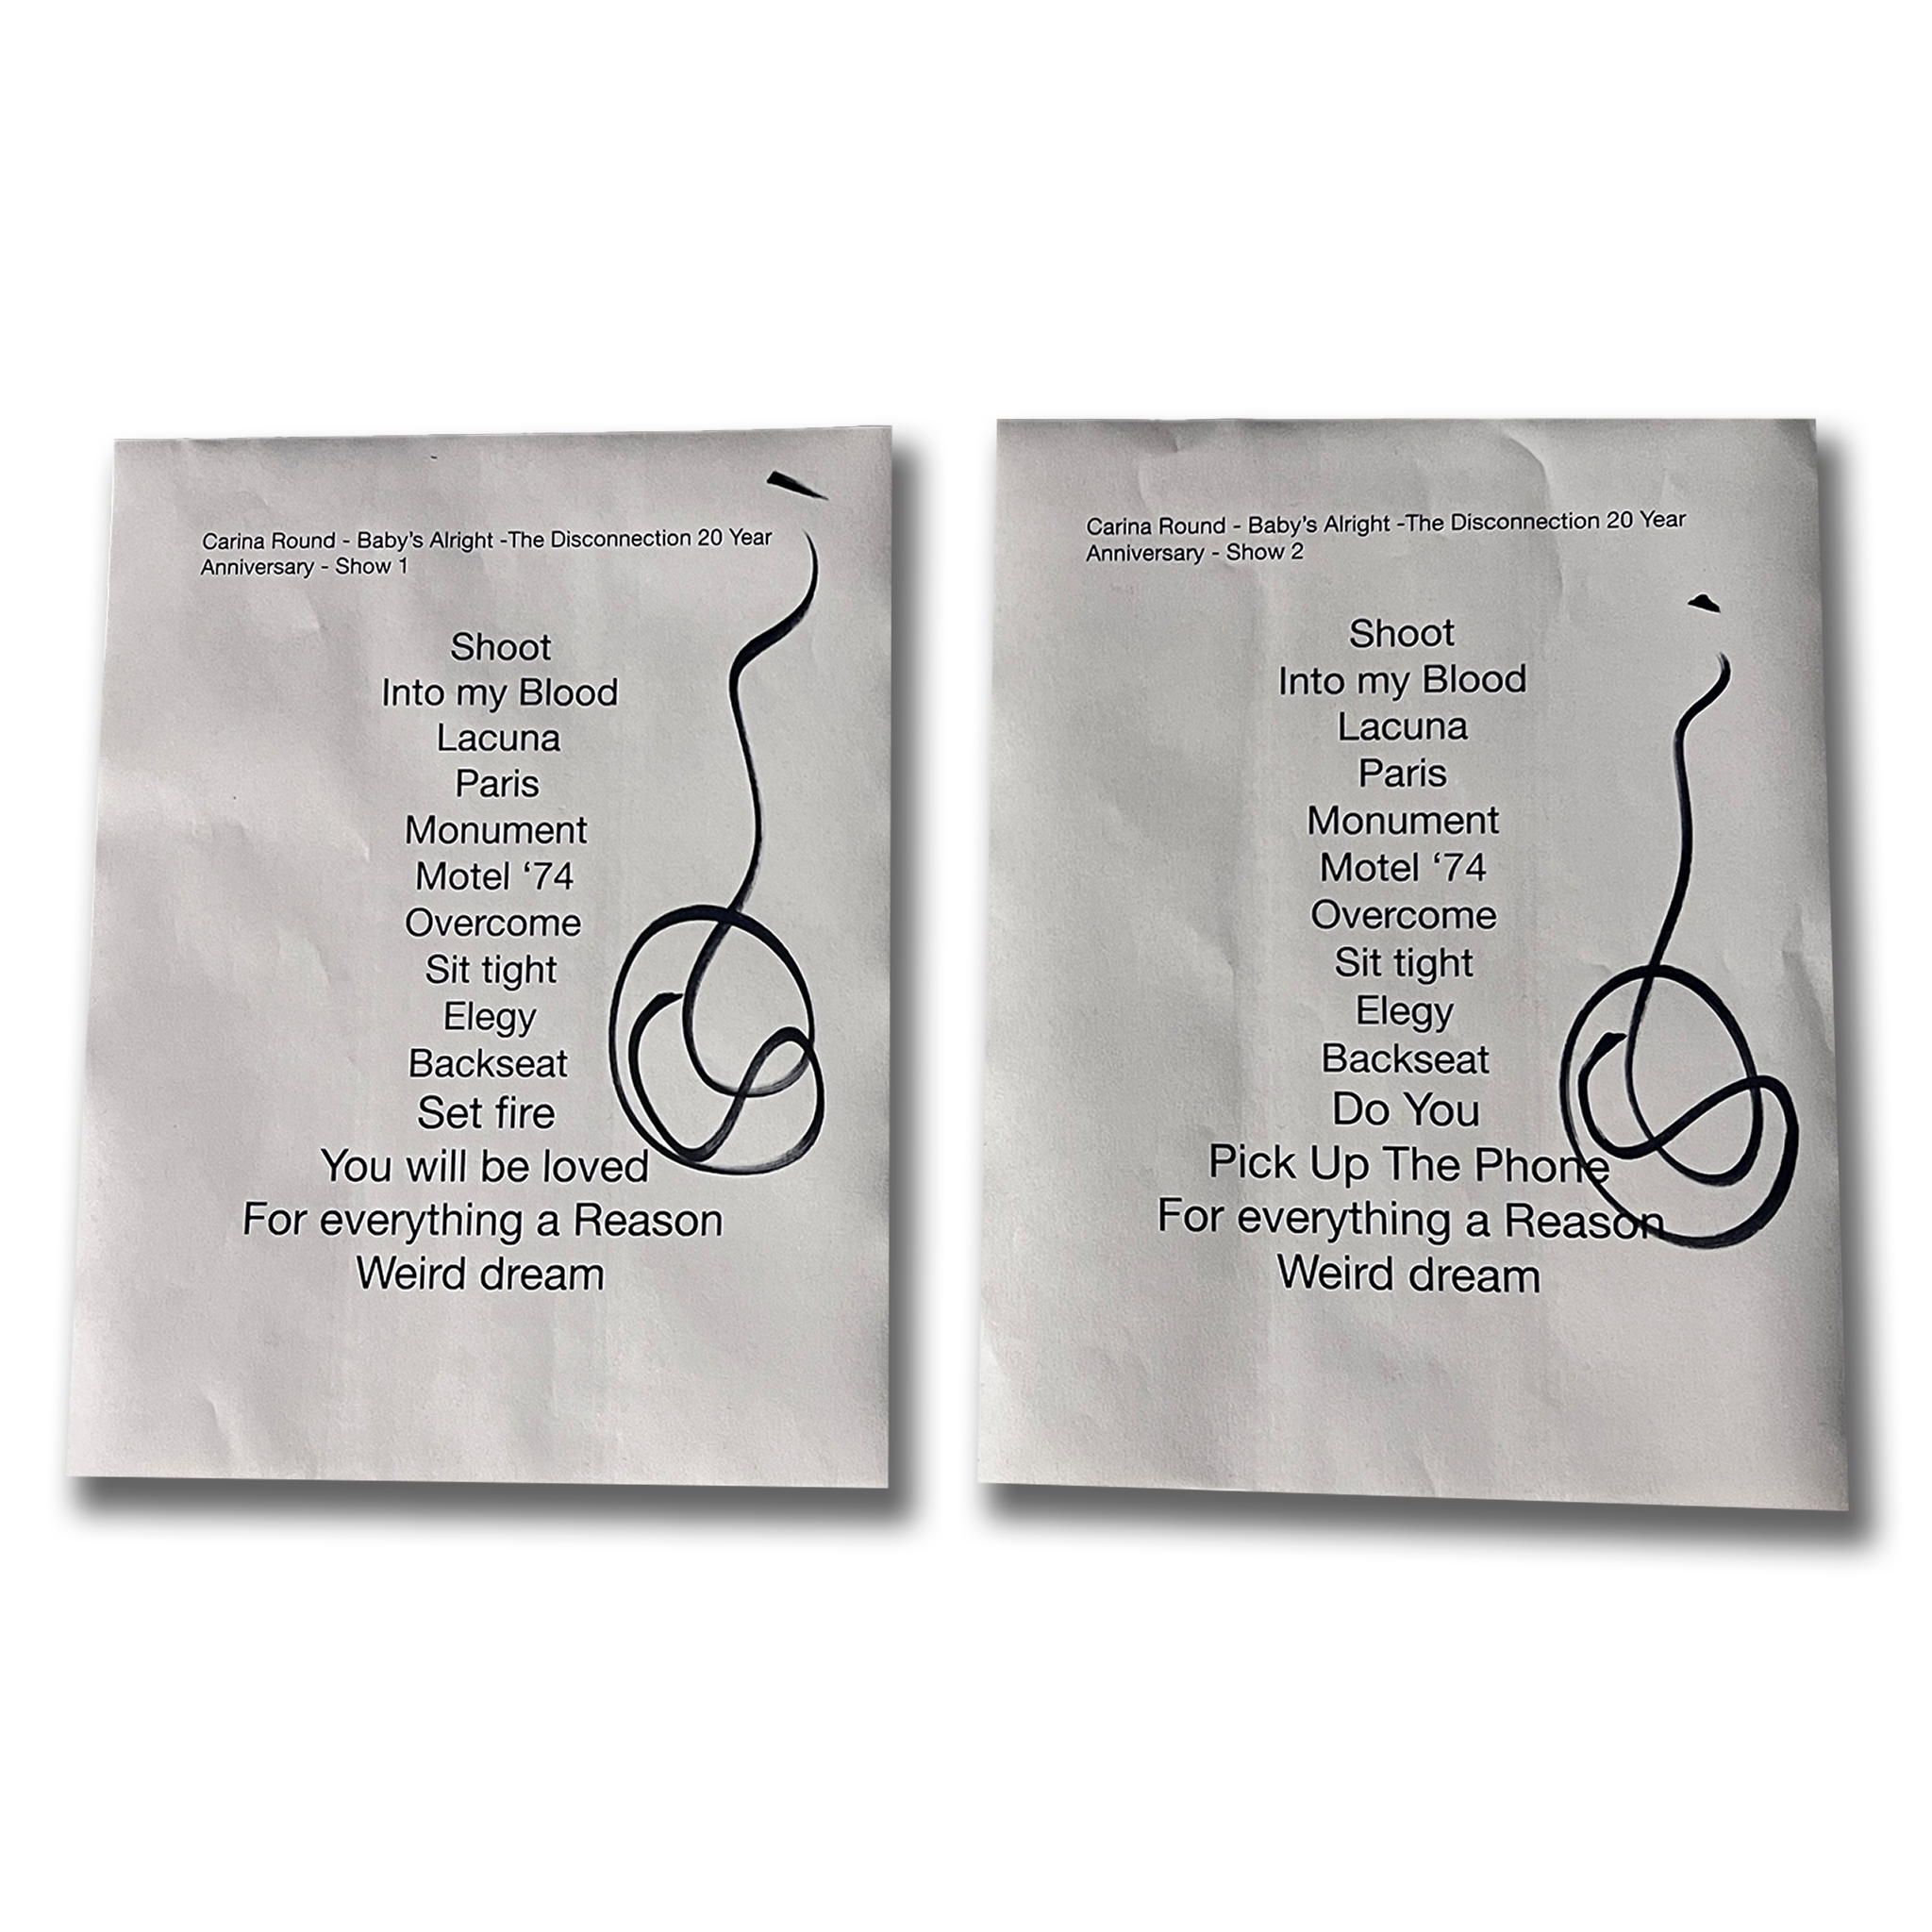 Carina Round Autographed Set Lists from Brooklyn NY